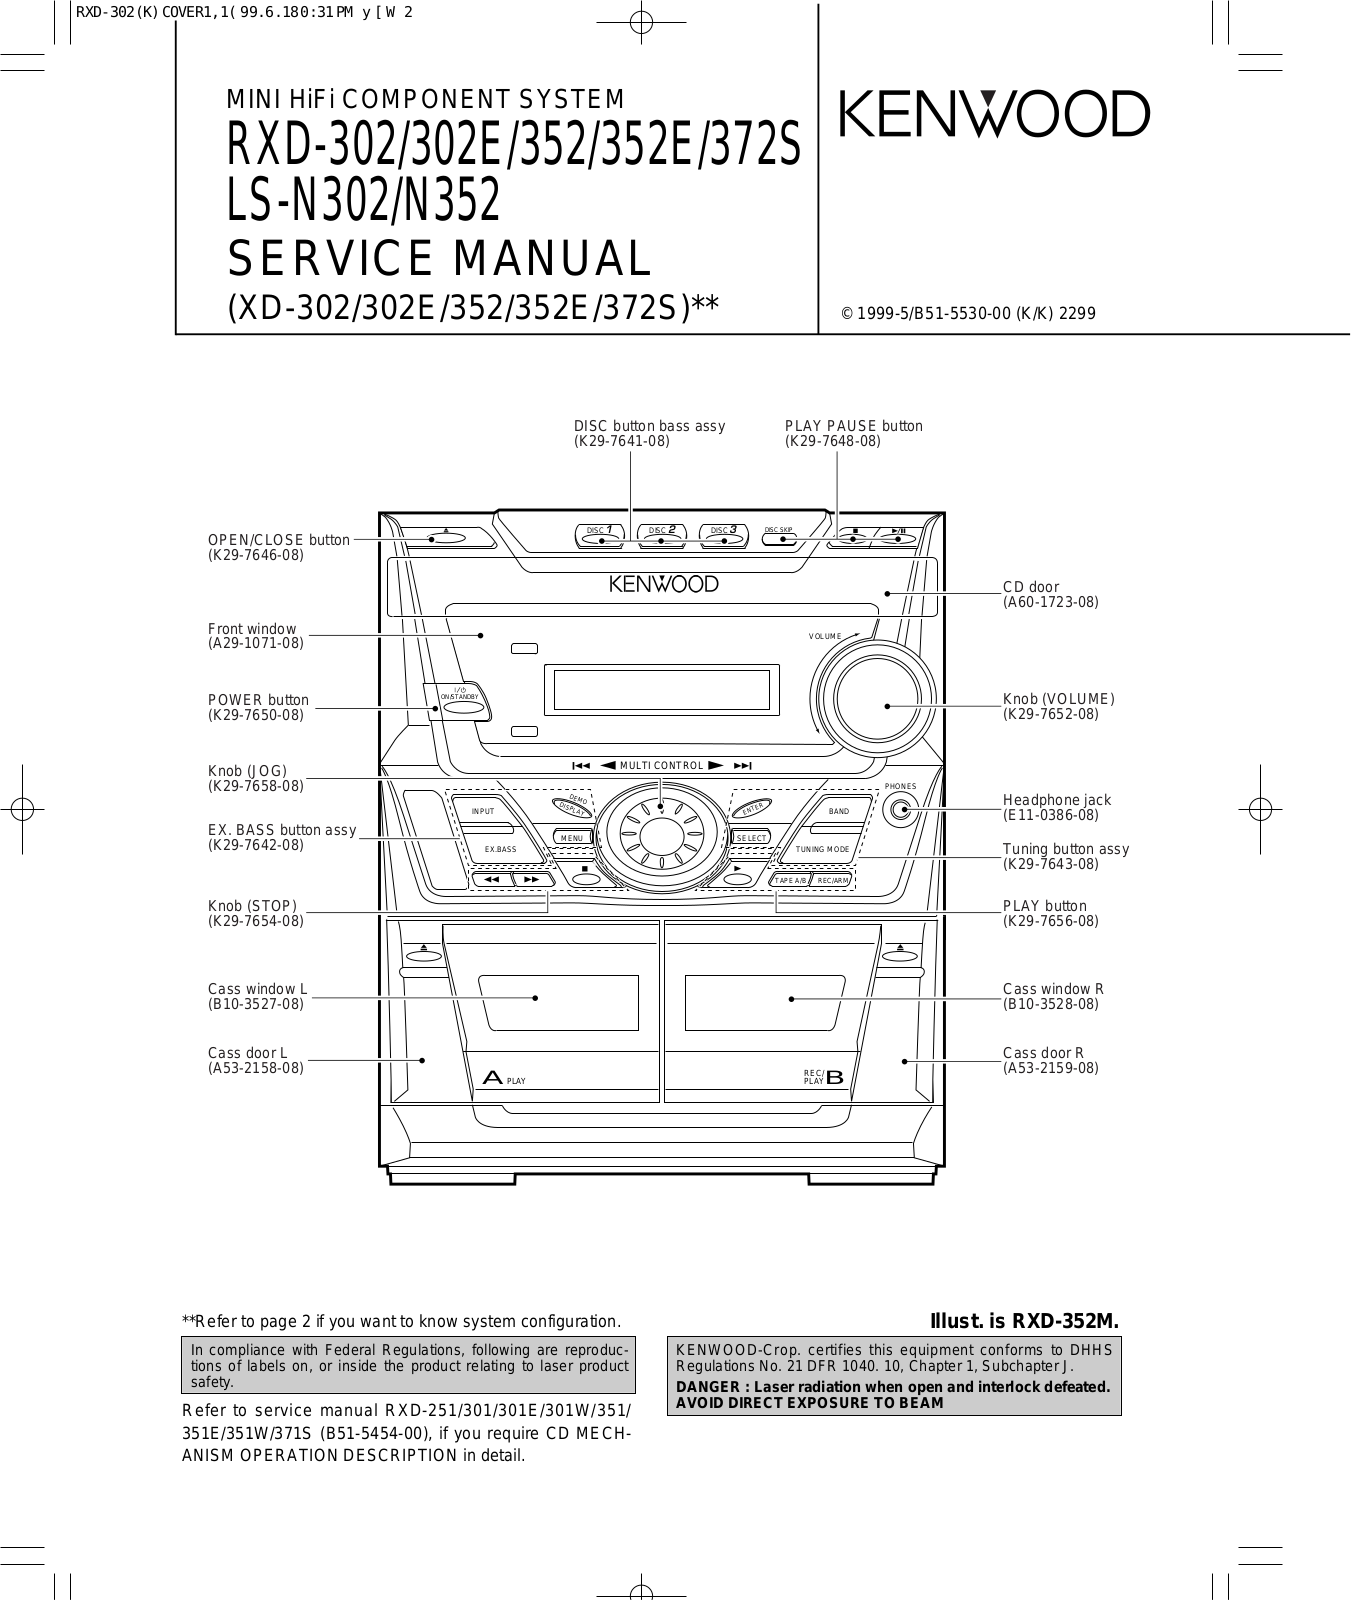 Kenwood LSN-302, LSN-352, RXD-302, RXD-302-E, RXD-352 Service manual